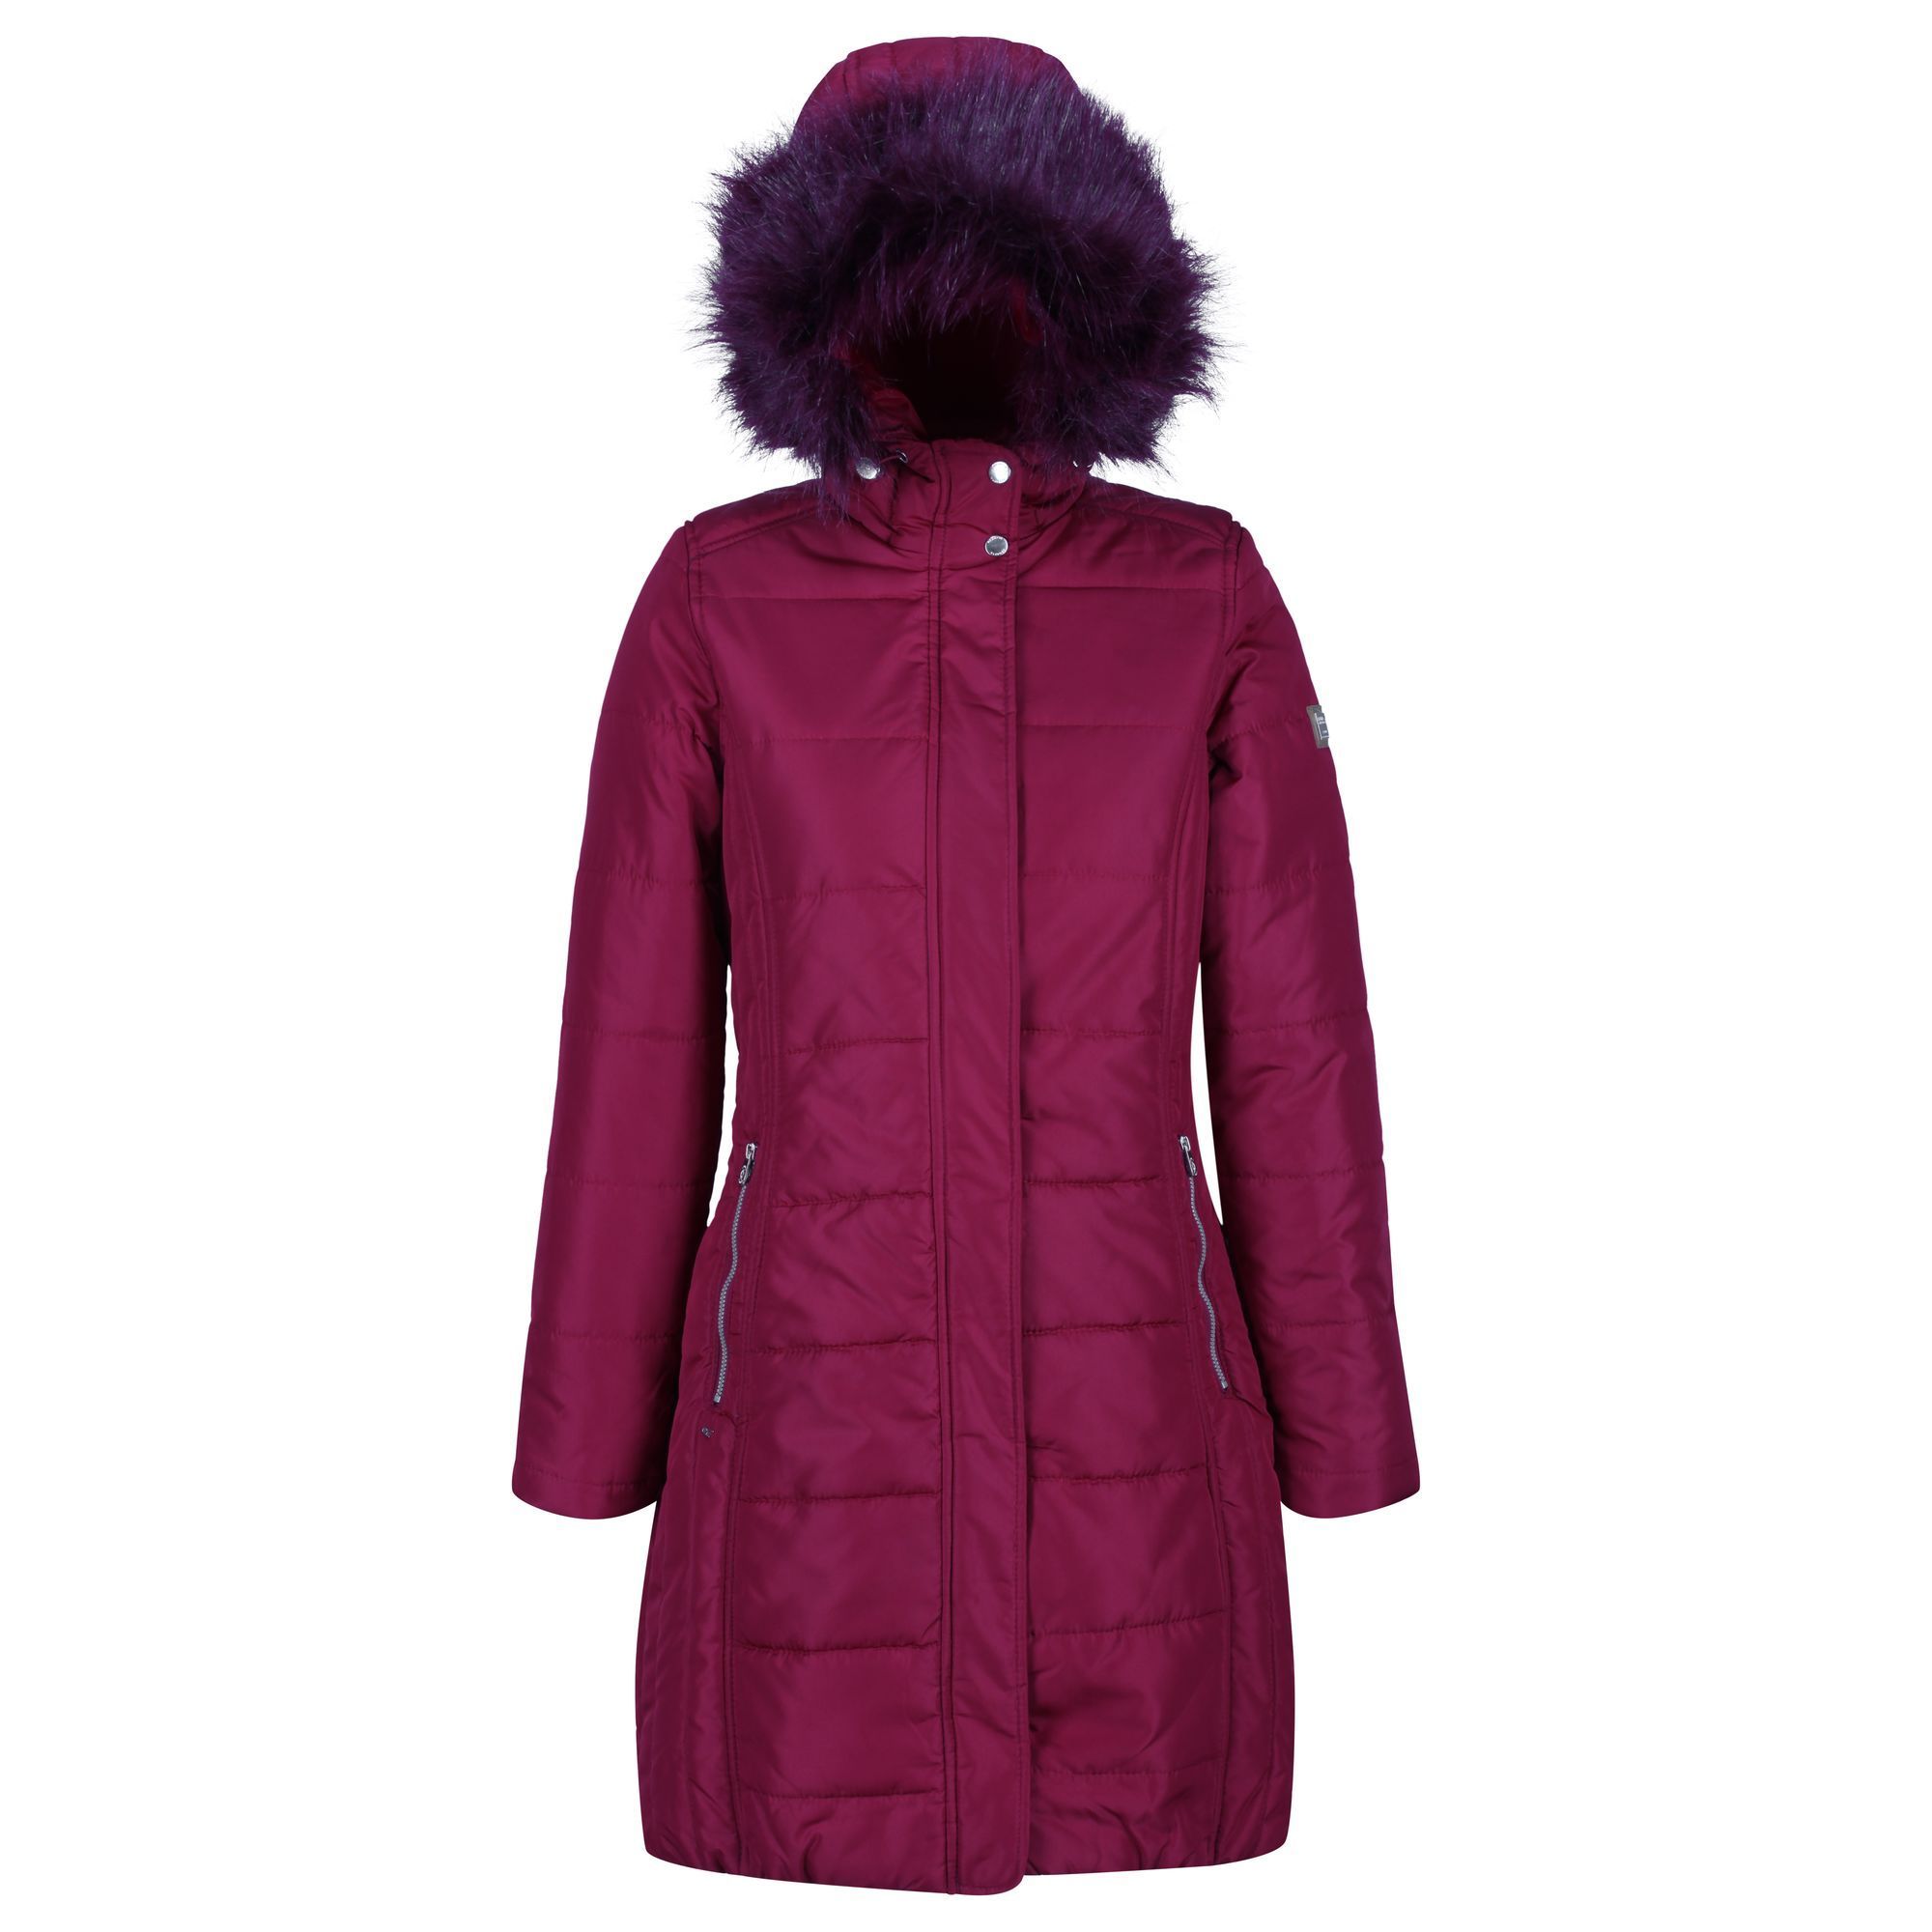 100% Polyester. Quilted water repellent polyester micro poplin. Thermo-Guard insulation. Polyester taffeta lined. Internal security pocket. Grown on hood with detachable faux fur trim.